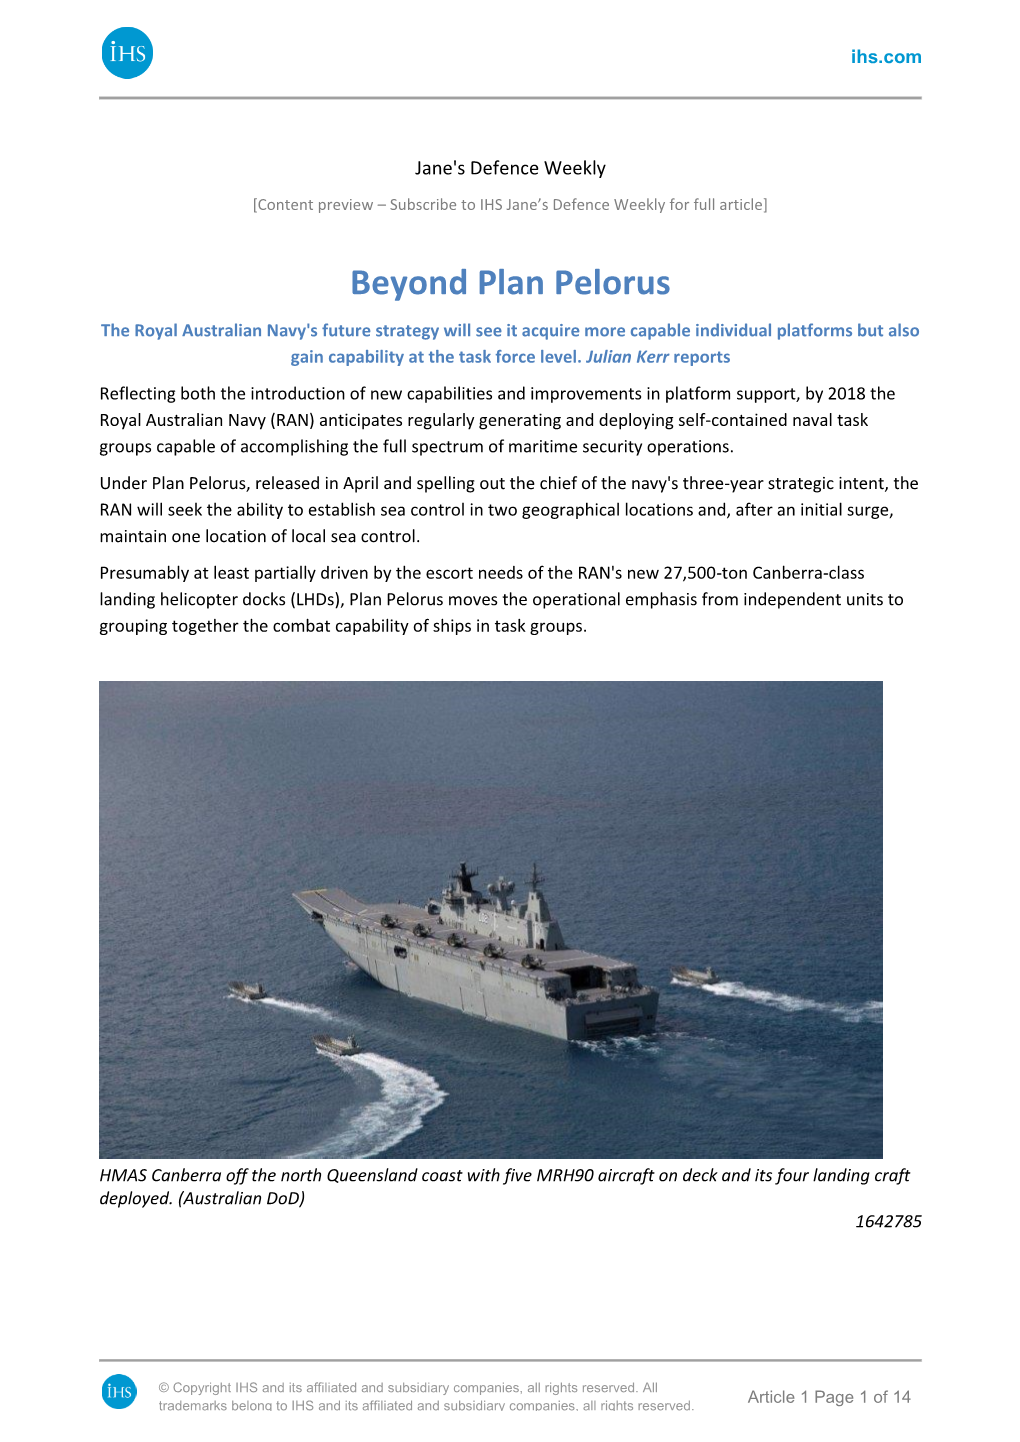 Beyond Plan Pelorus the Royal Australian Navy's Future Strategy Will See It Acquire More Capable Individual Platforms but Also Gain Capability at the Task Force Level